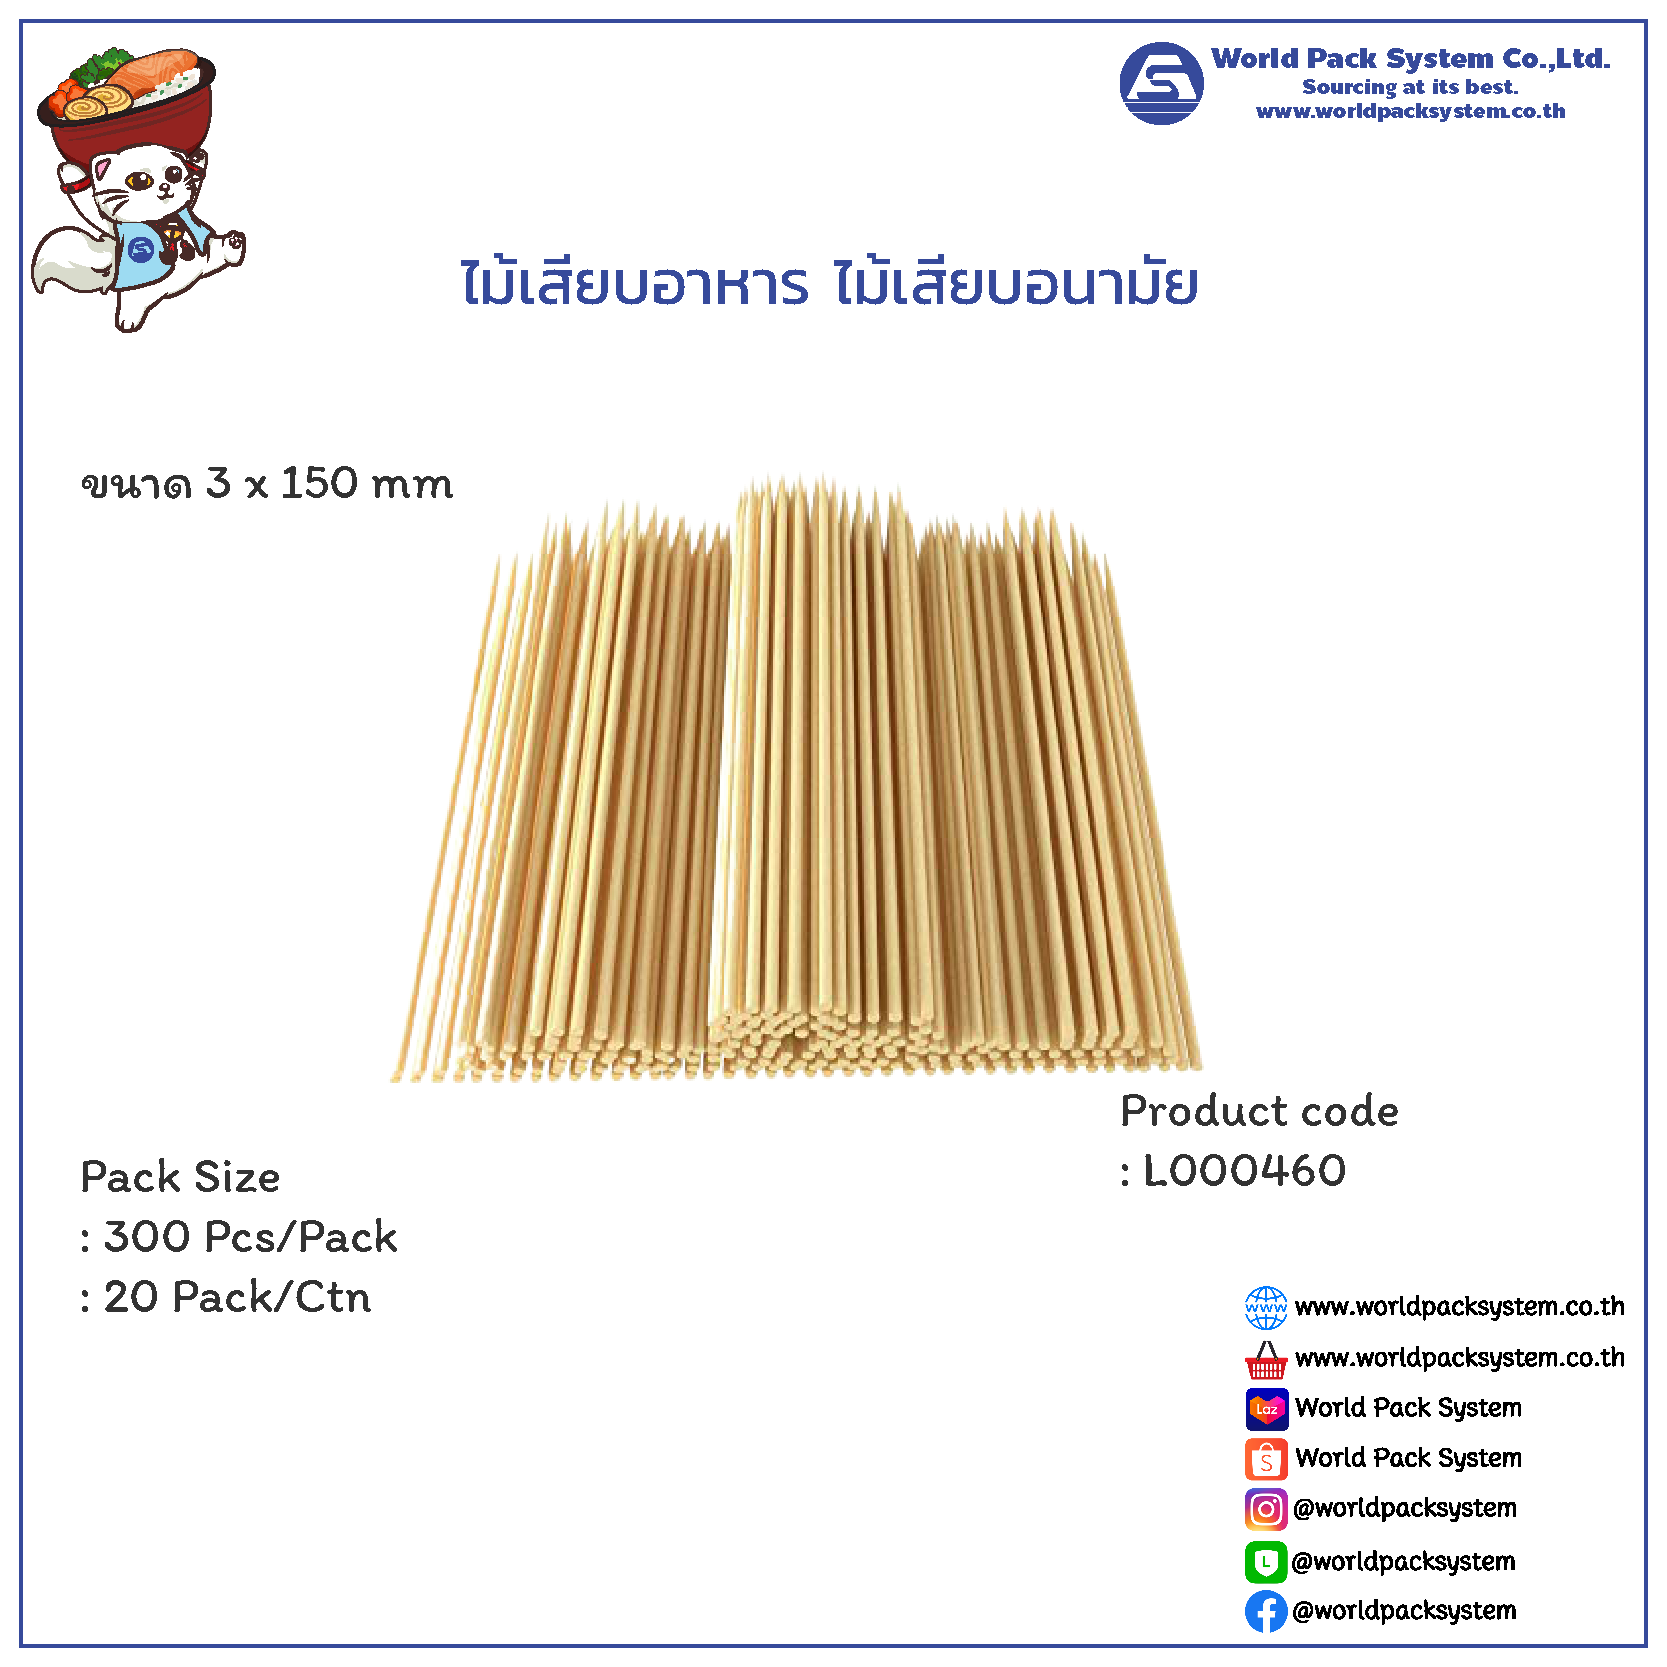 Skewers bamboo size 15 cm. (300 pcs)